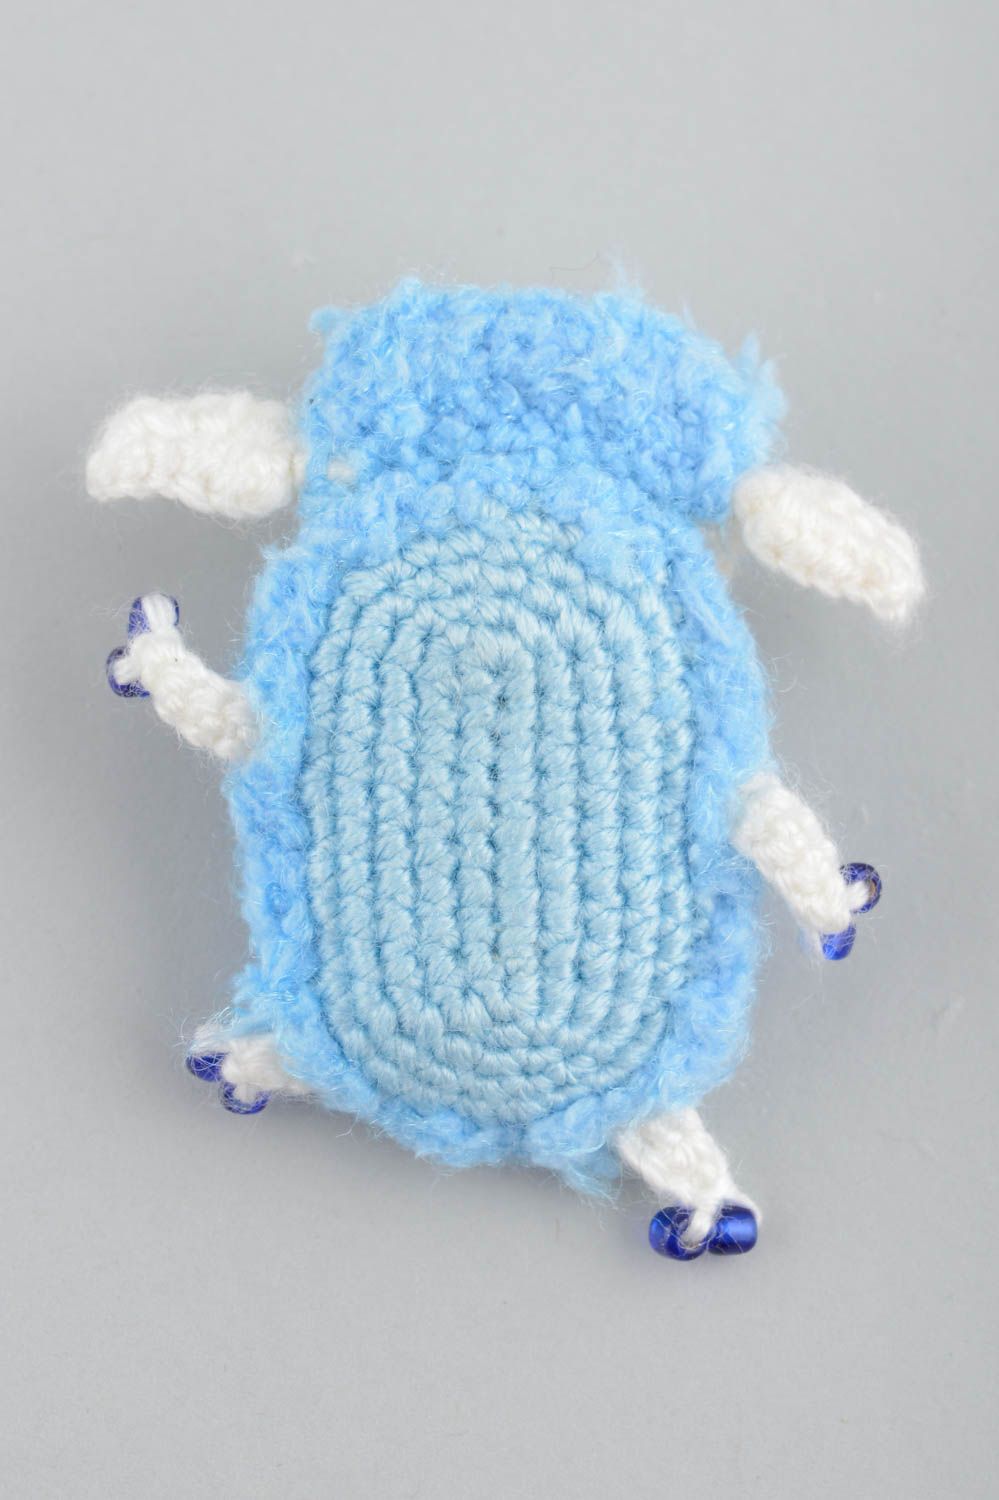 Soft crocheted toy magnet in the form of lamb small blue handmade accessory photo 2